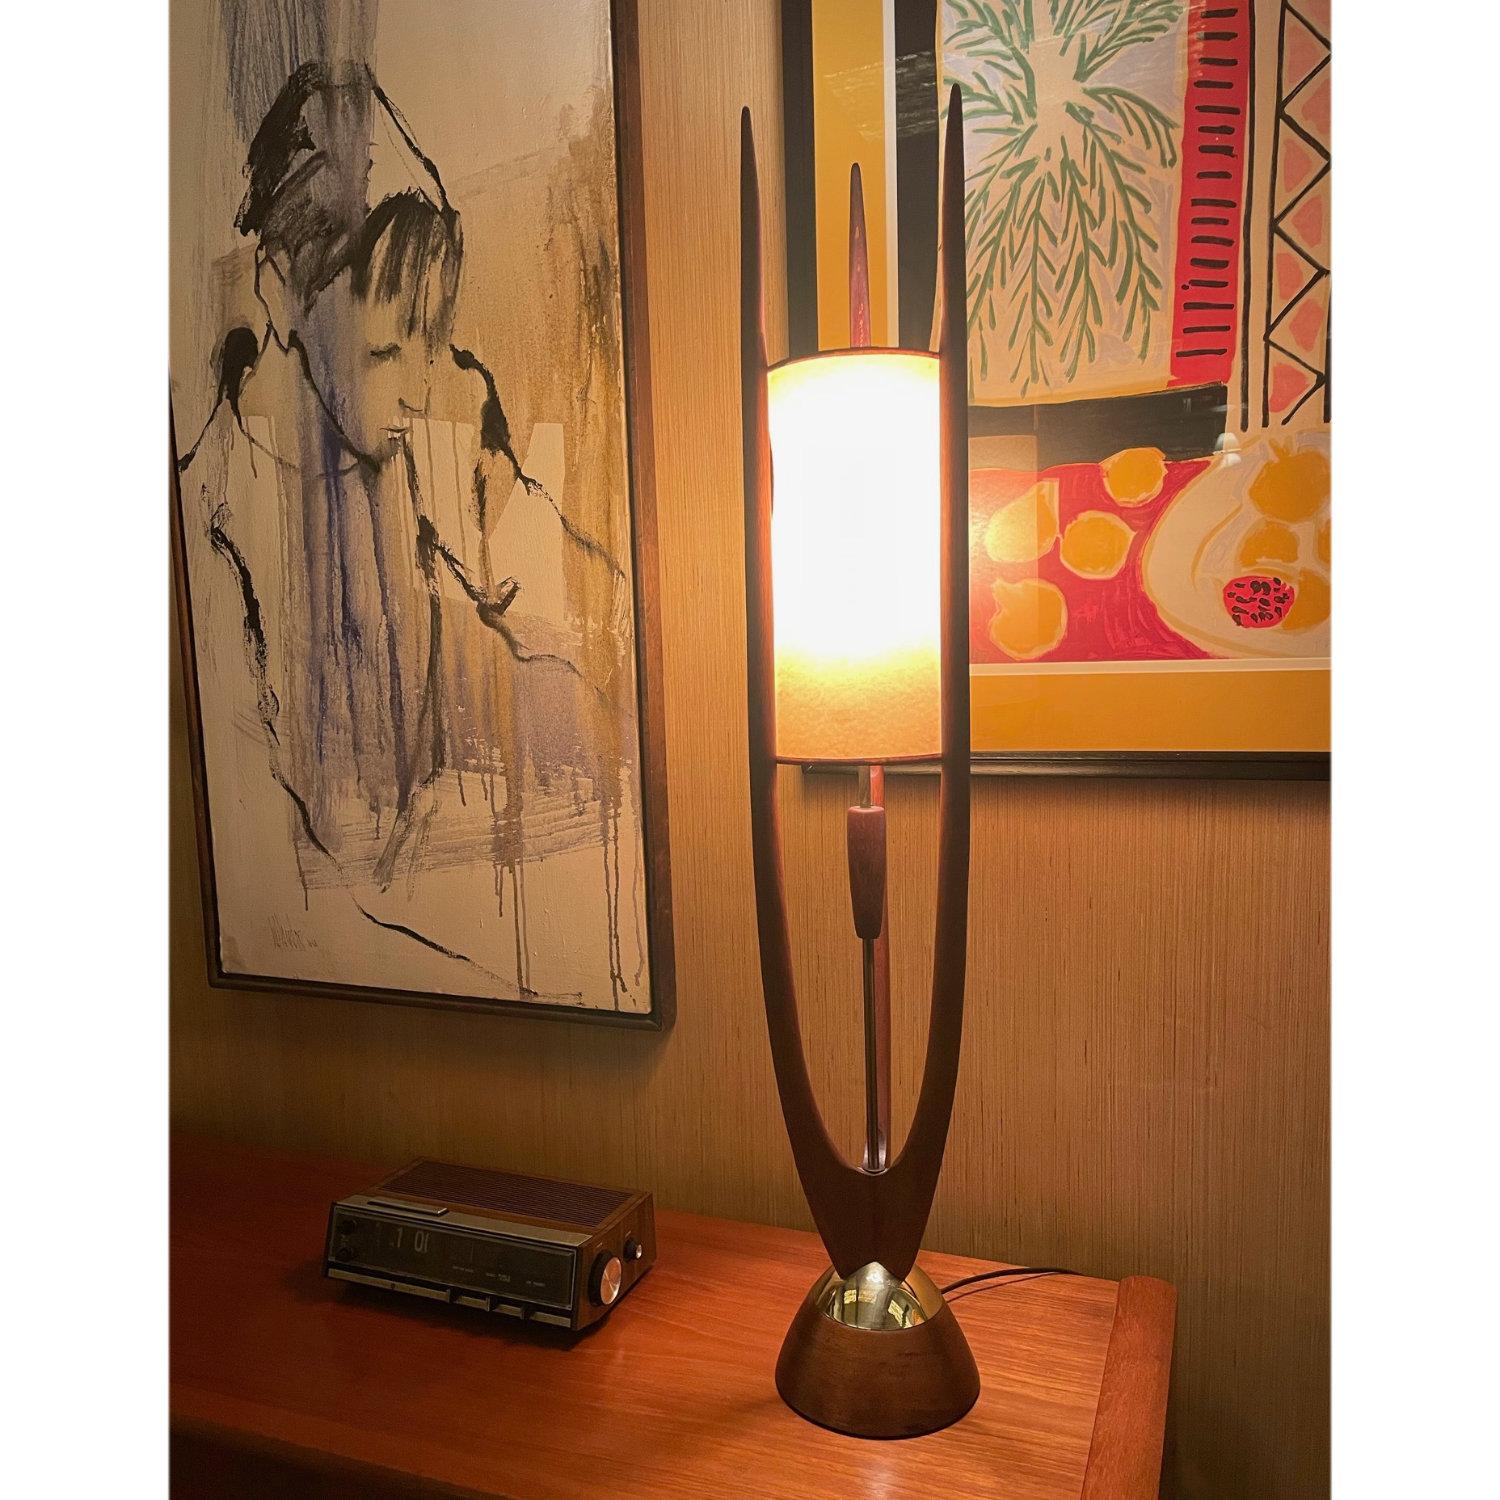 Stunning sculptural Mid-Century Modern table lamp designed in the manner of Modeline. The lamp appears to be solid walnut or teak, accented with brass at the base. The three-point trident structure cradles the original cylinder lamp shade at center.